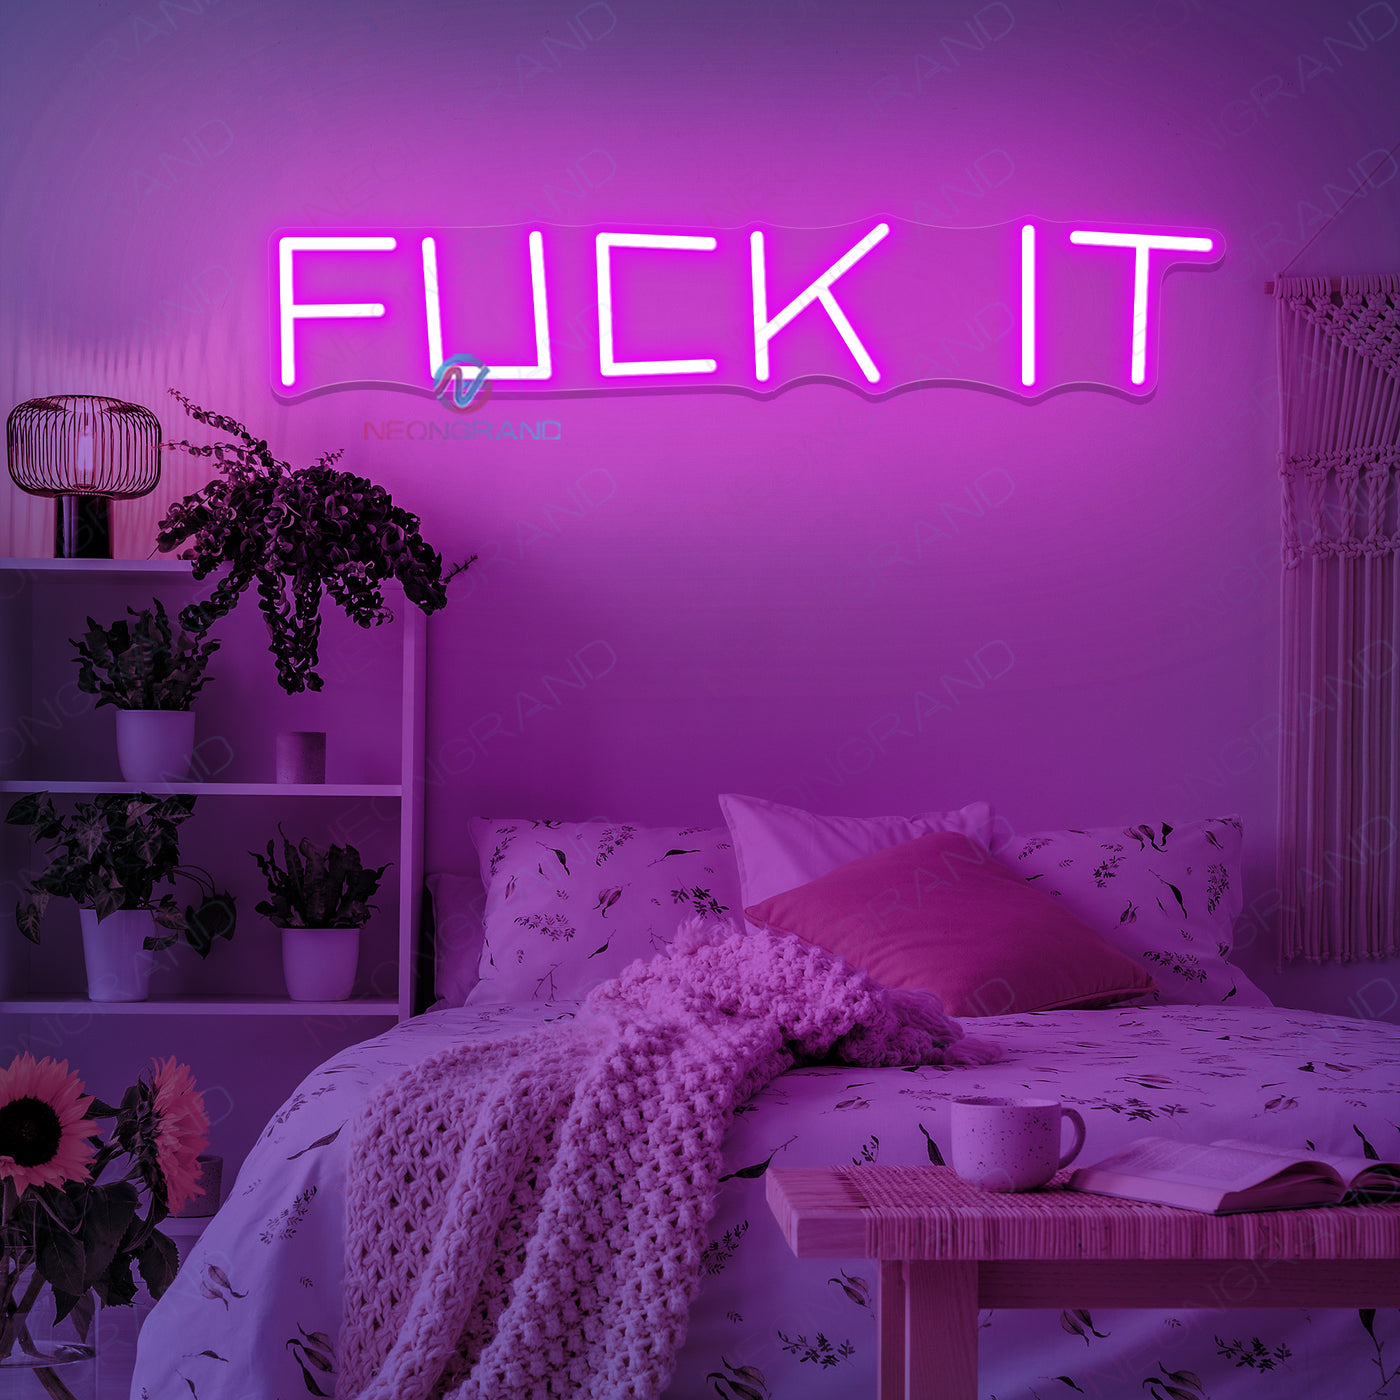 Fuck It Neon Sign Led Light Man Cave Neon Signs violet